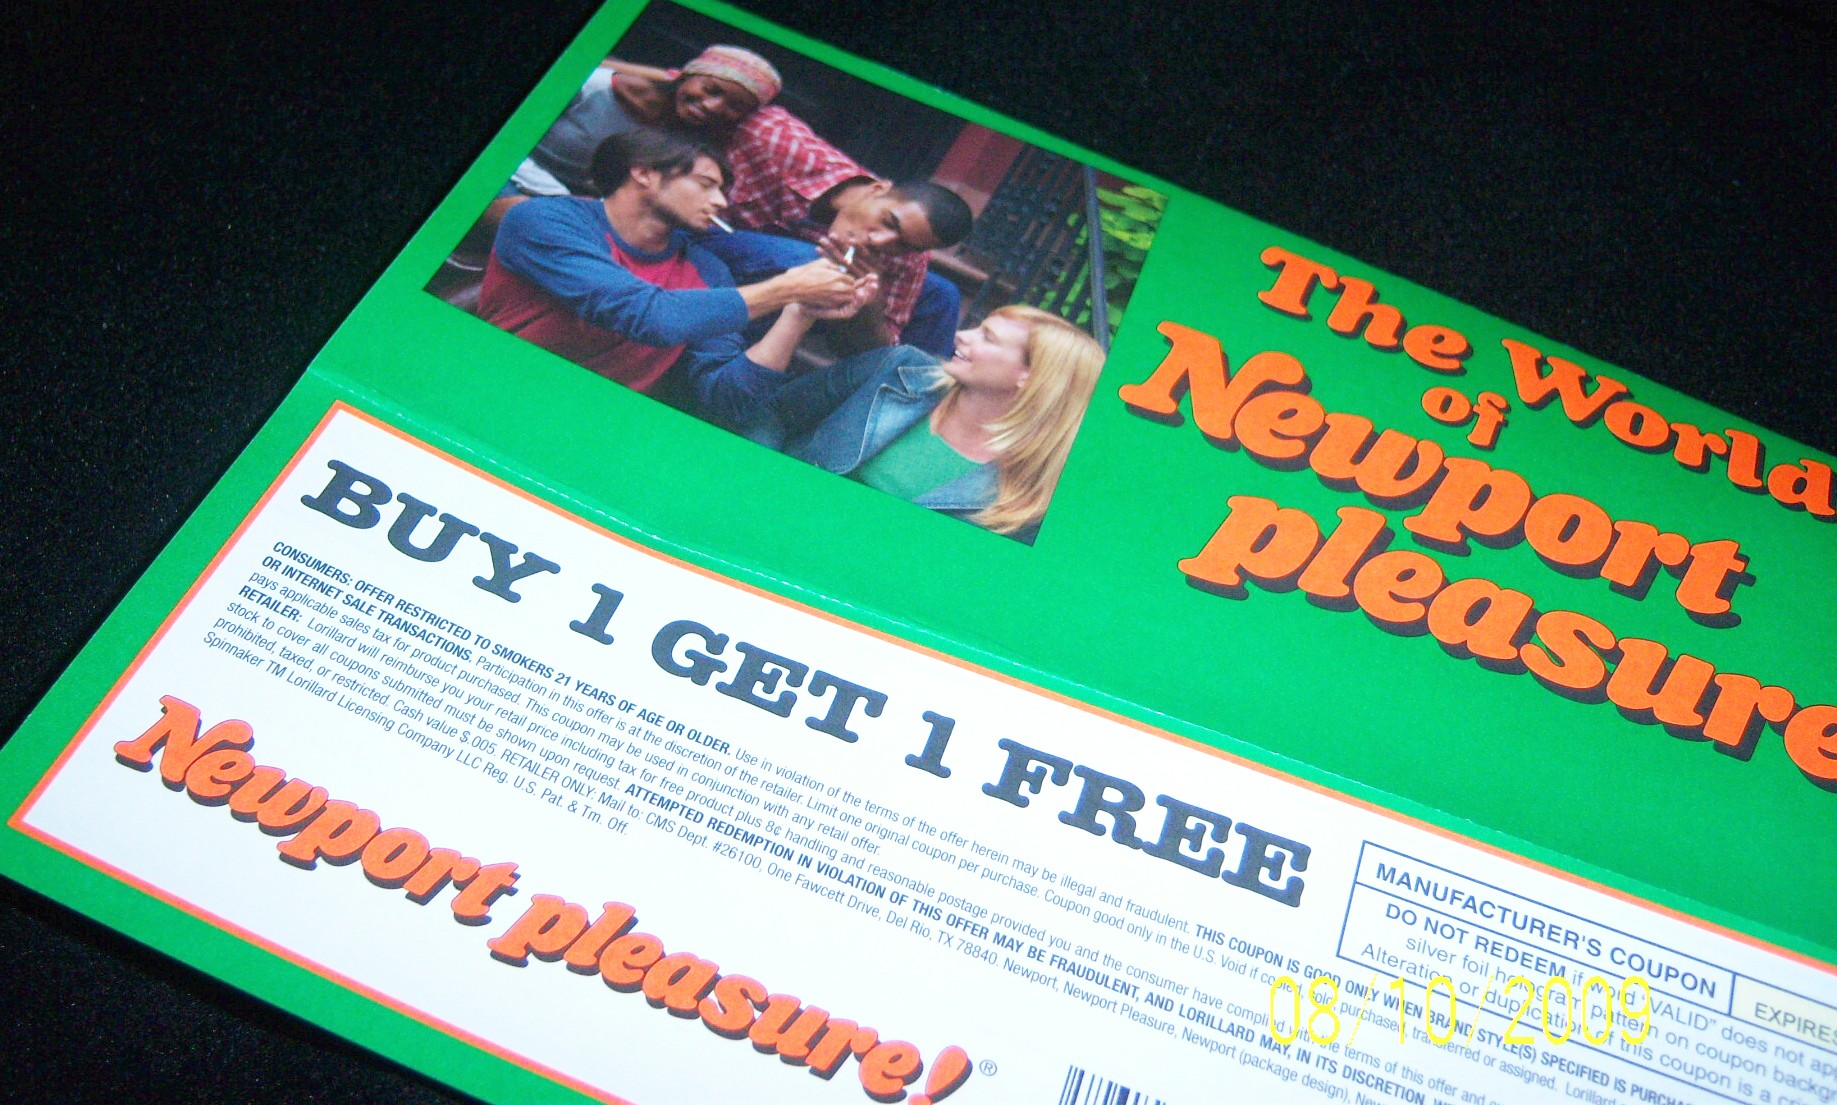 Buy 1 Get 1 Free pack of Newport cigarettes Coupon